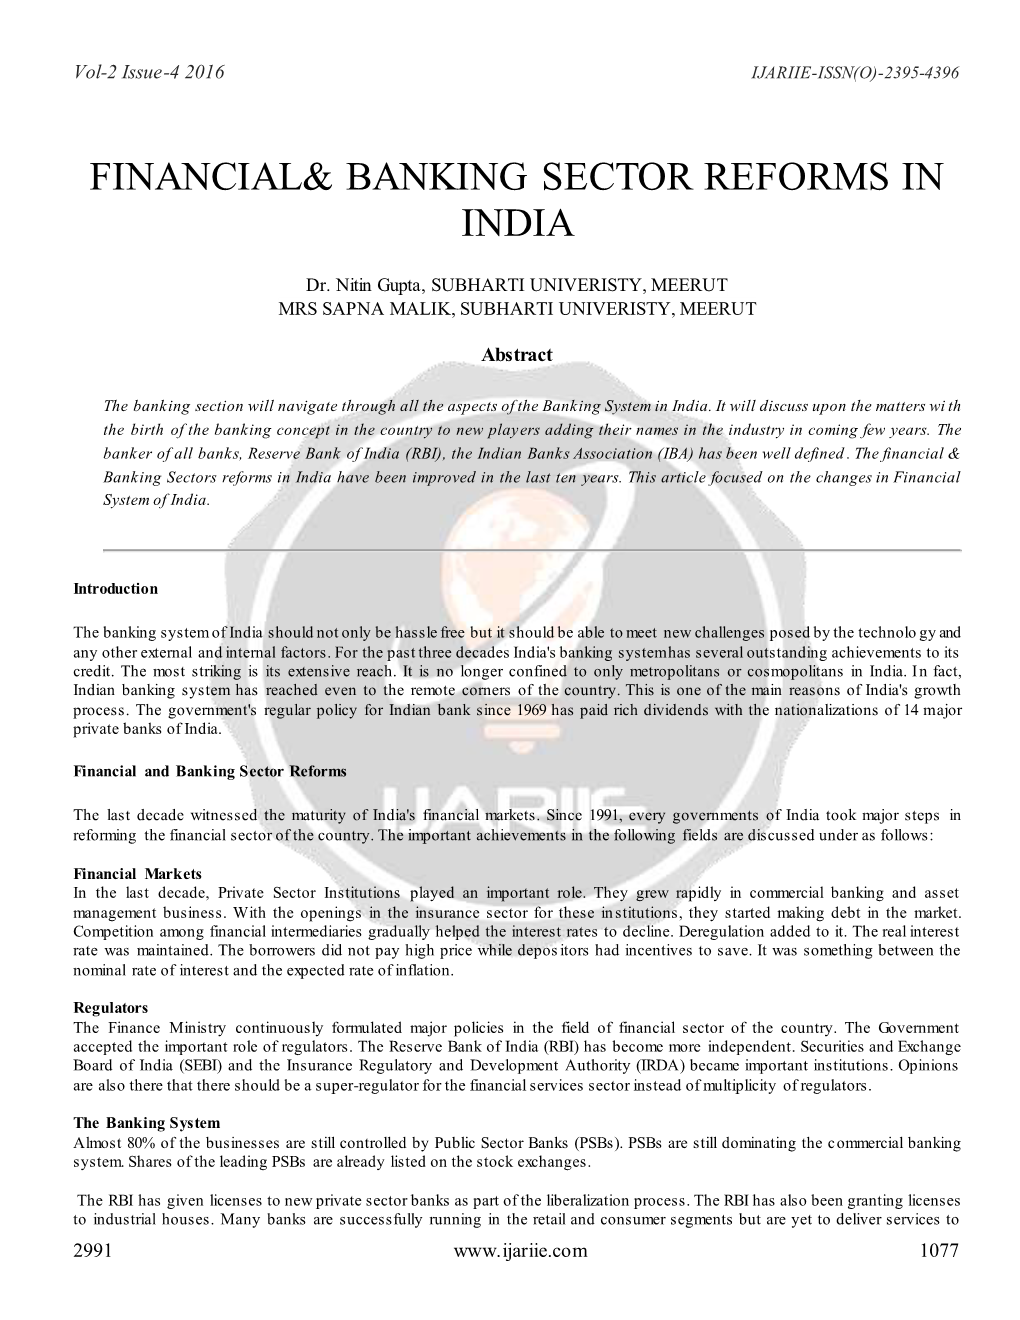 Financial& Banking Sector Reforms in India